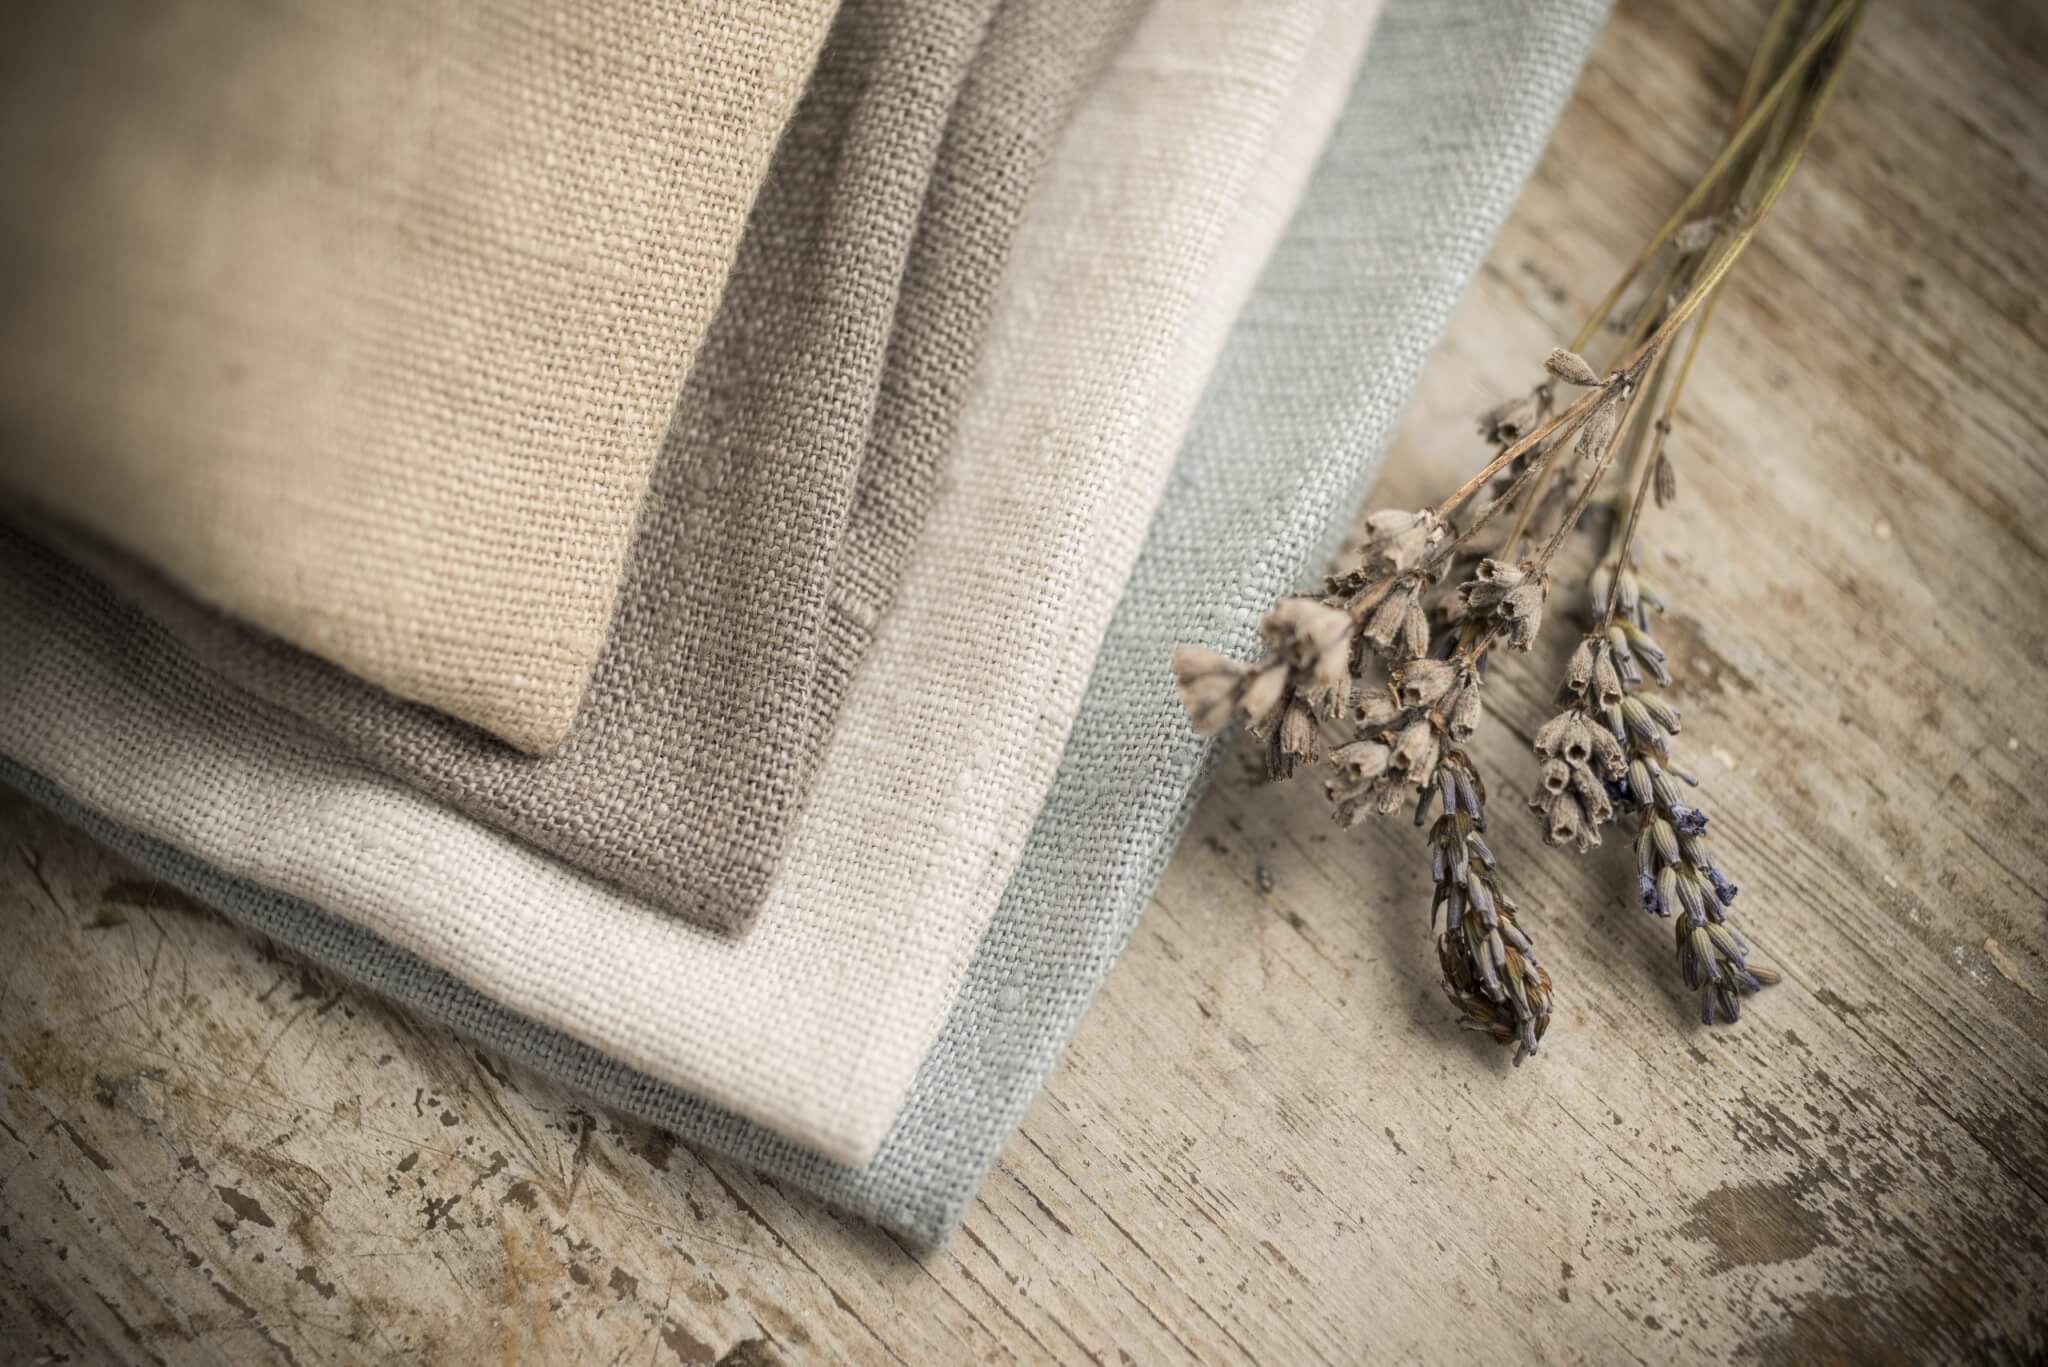 Types of linen fabric: from burlap to cambric